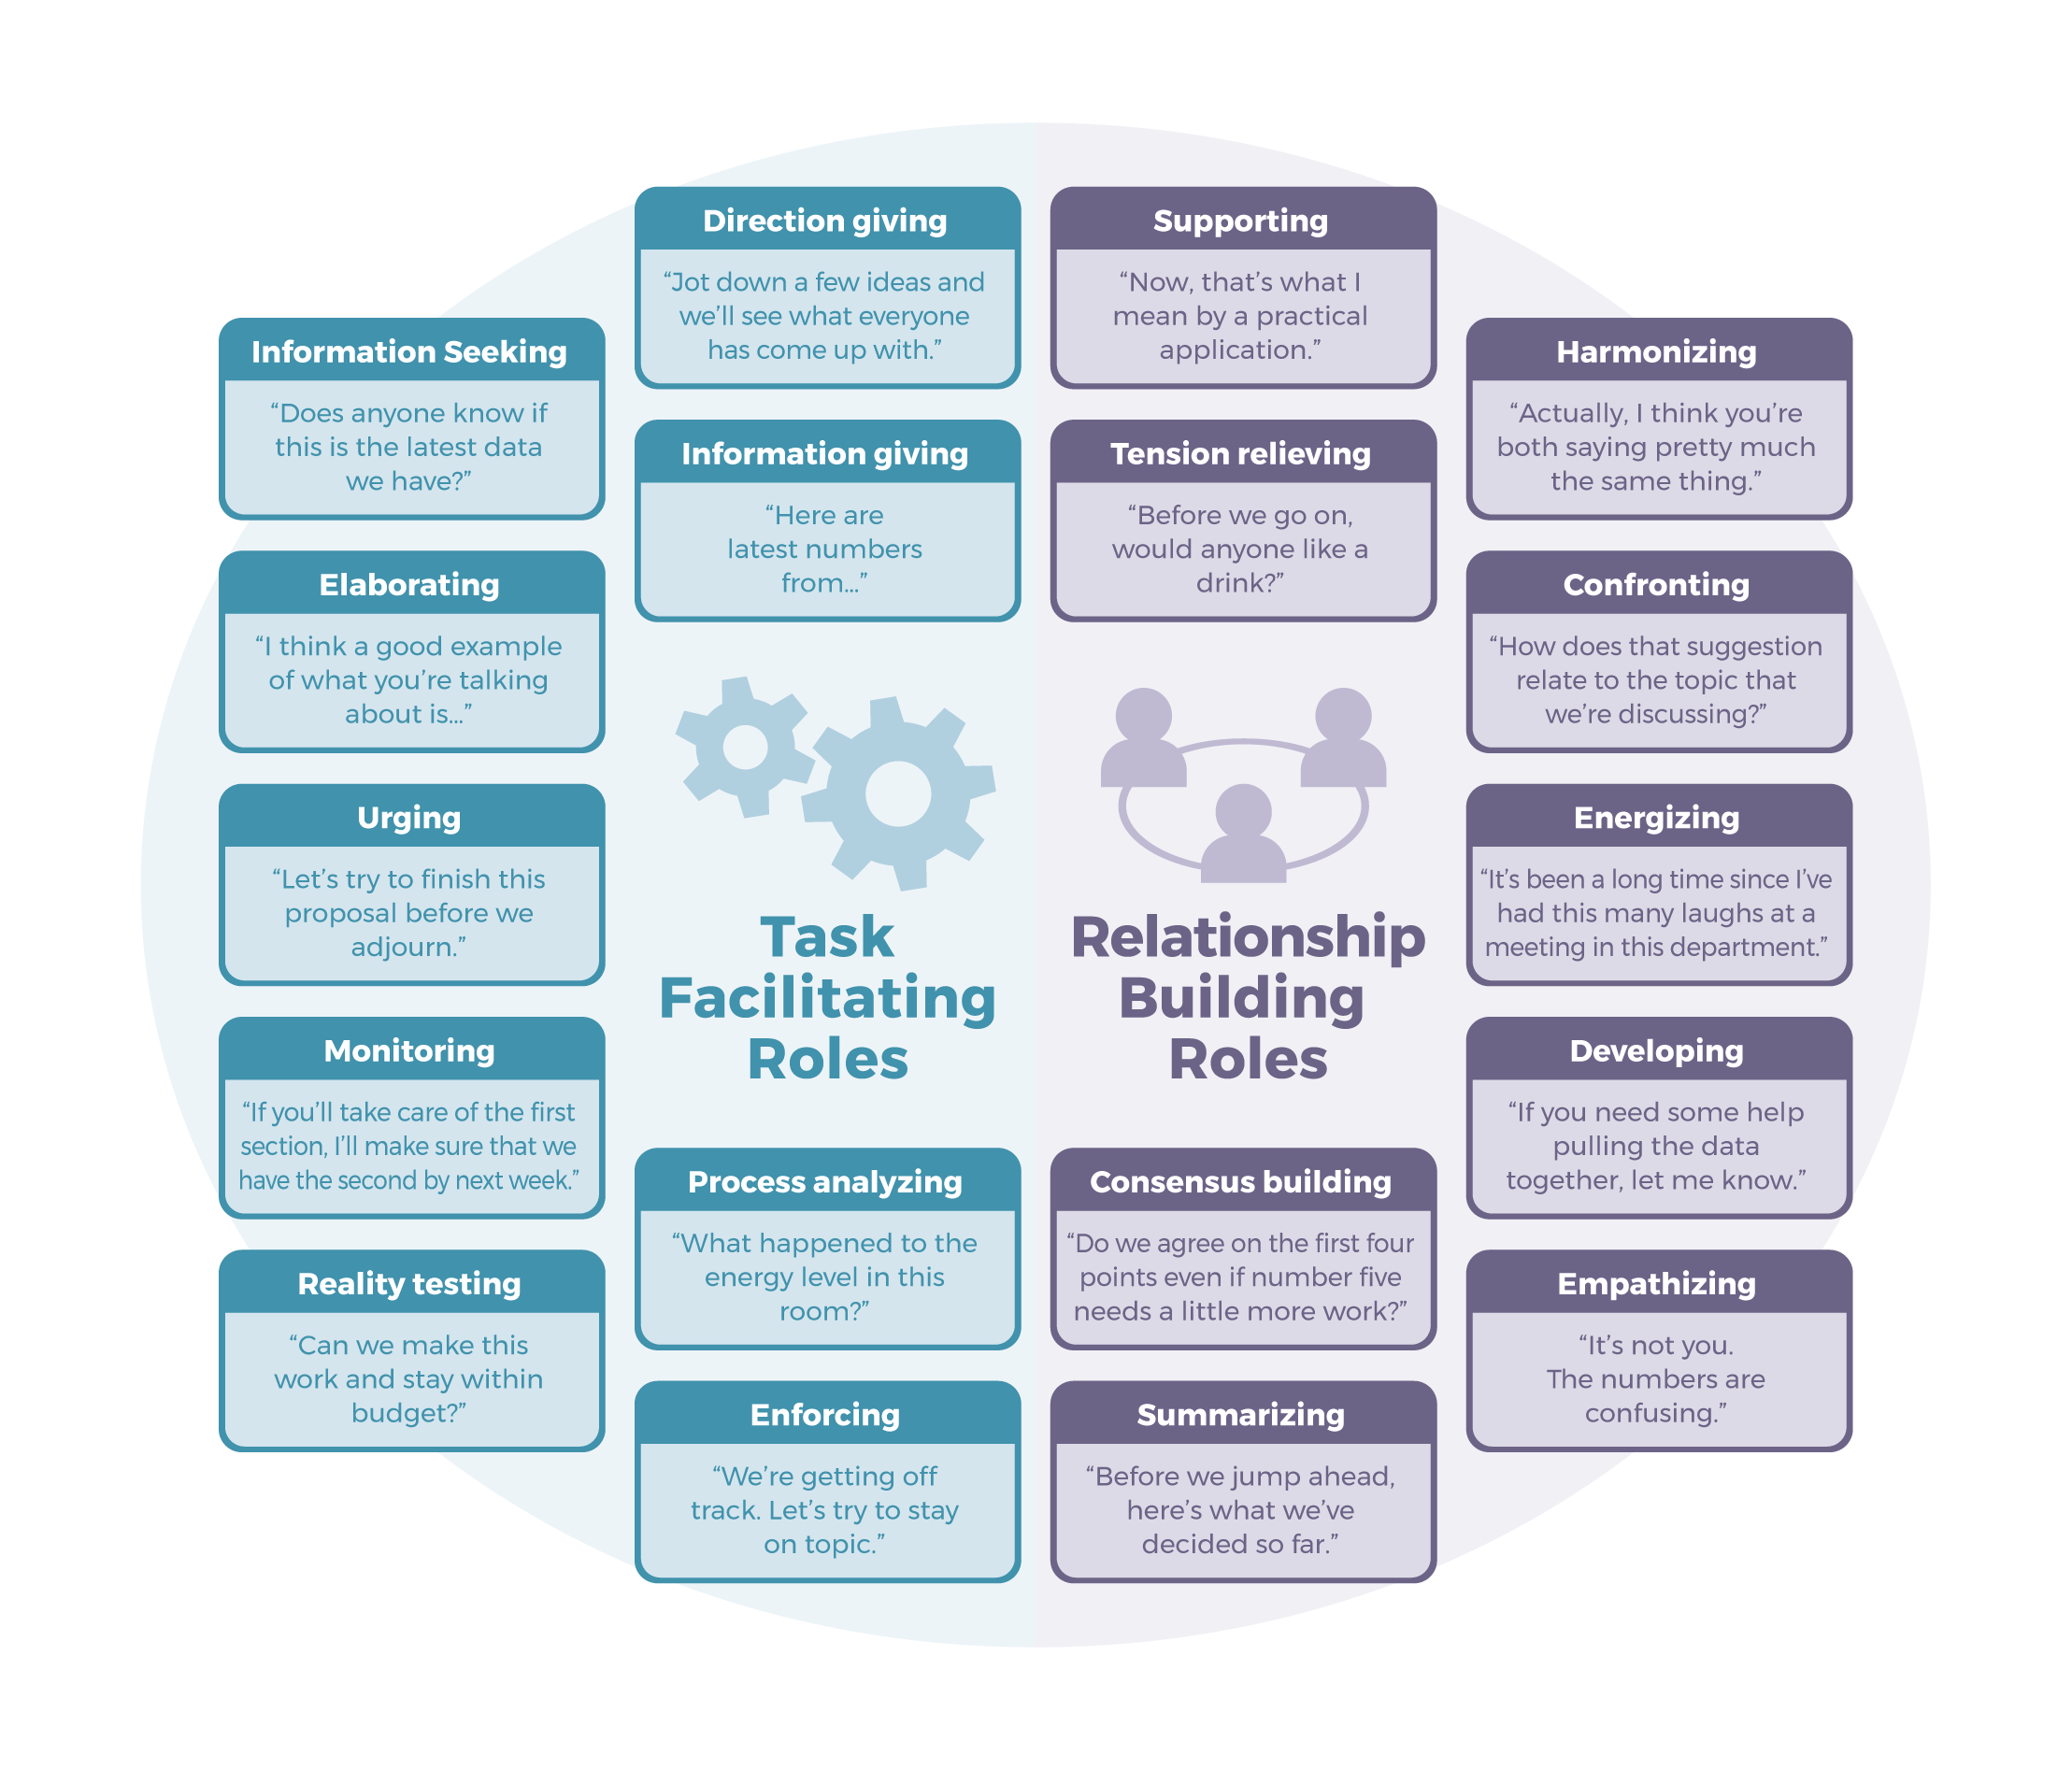 Chart providing examples of task-facilitating role, relationship-building roles, and their examples